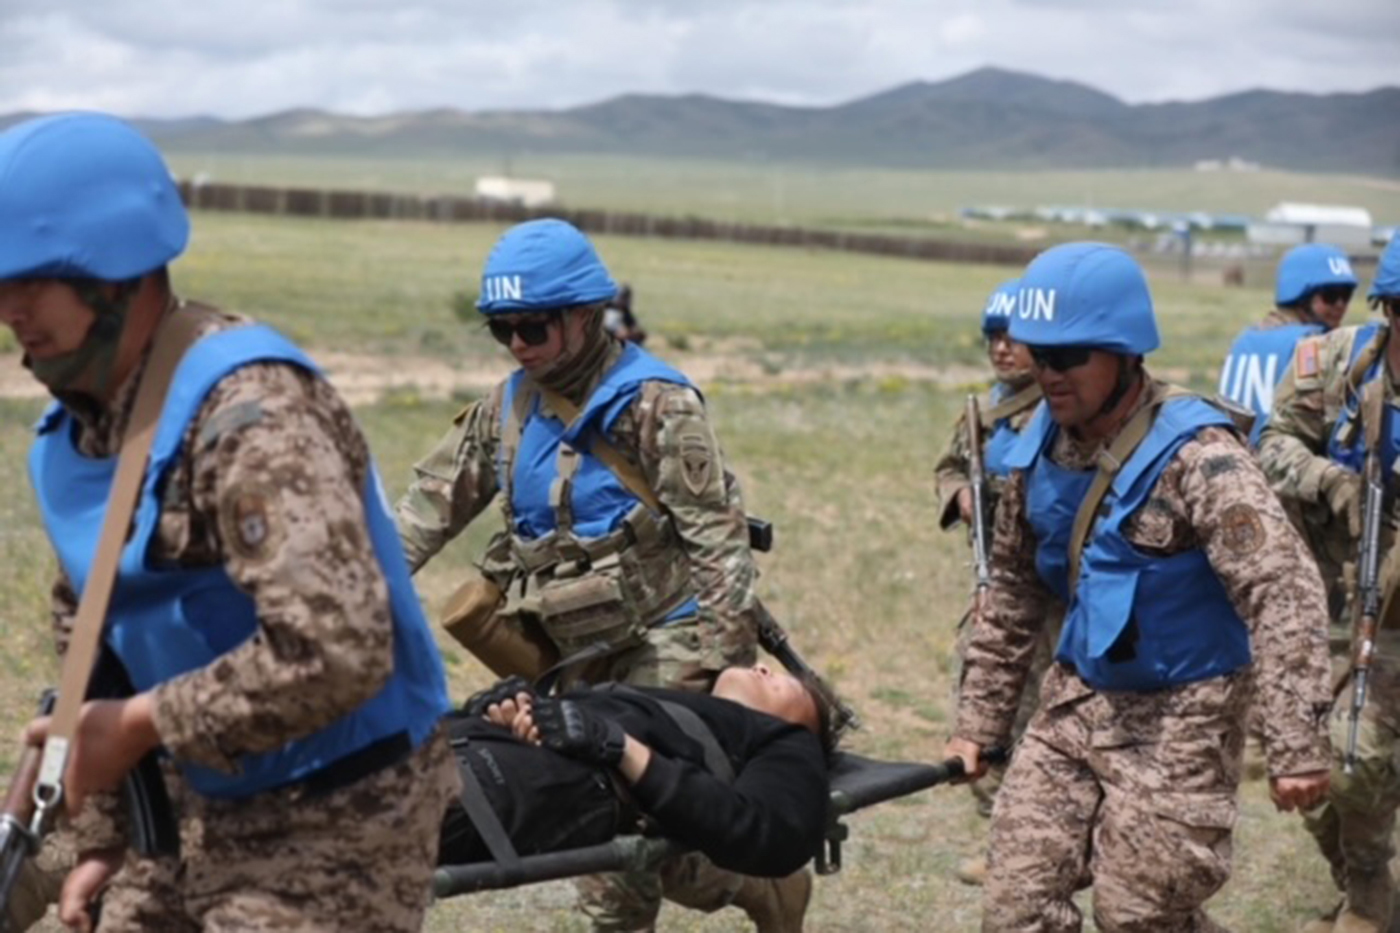 members of the Army Reserve carrying an injured person across a field in Mongolia